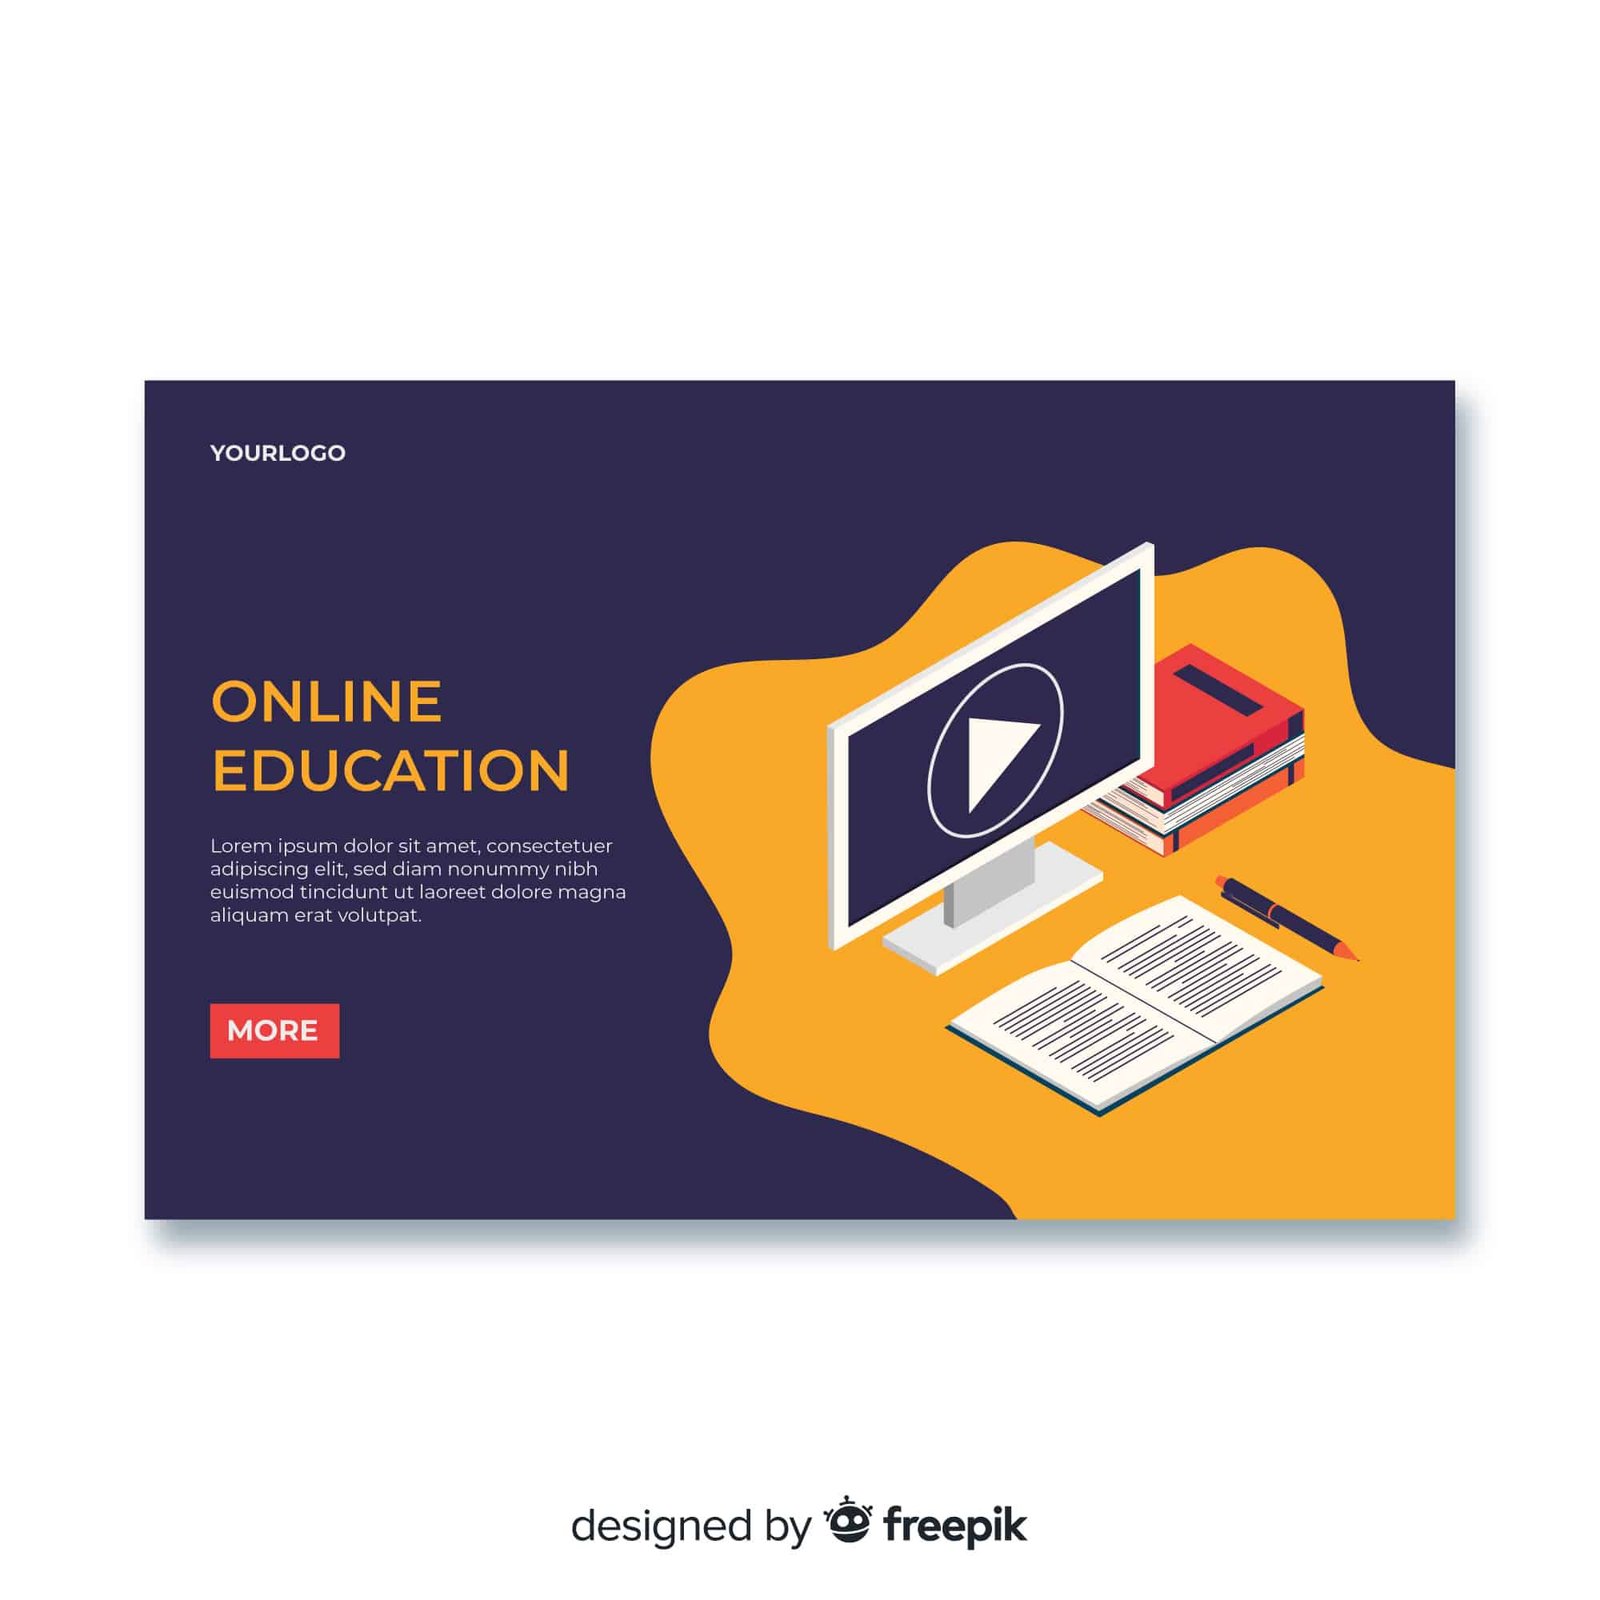 Coursera Expand Your Knowledge Online